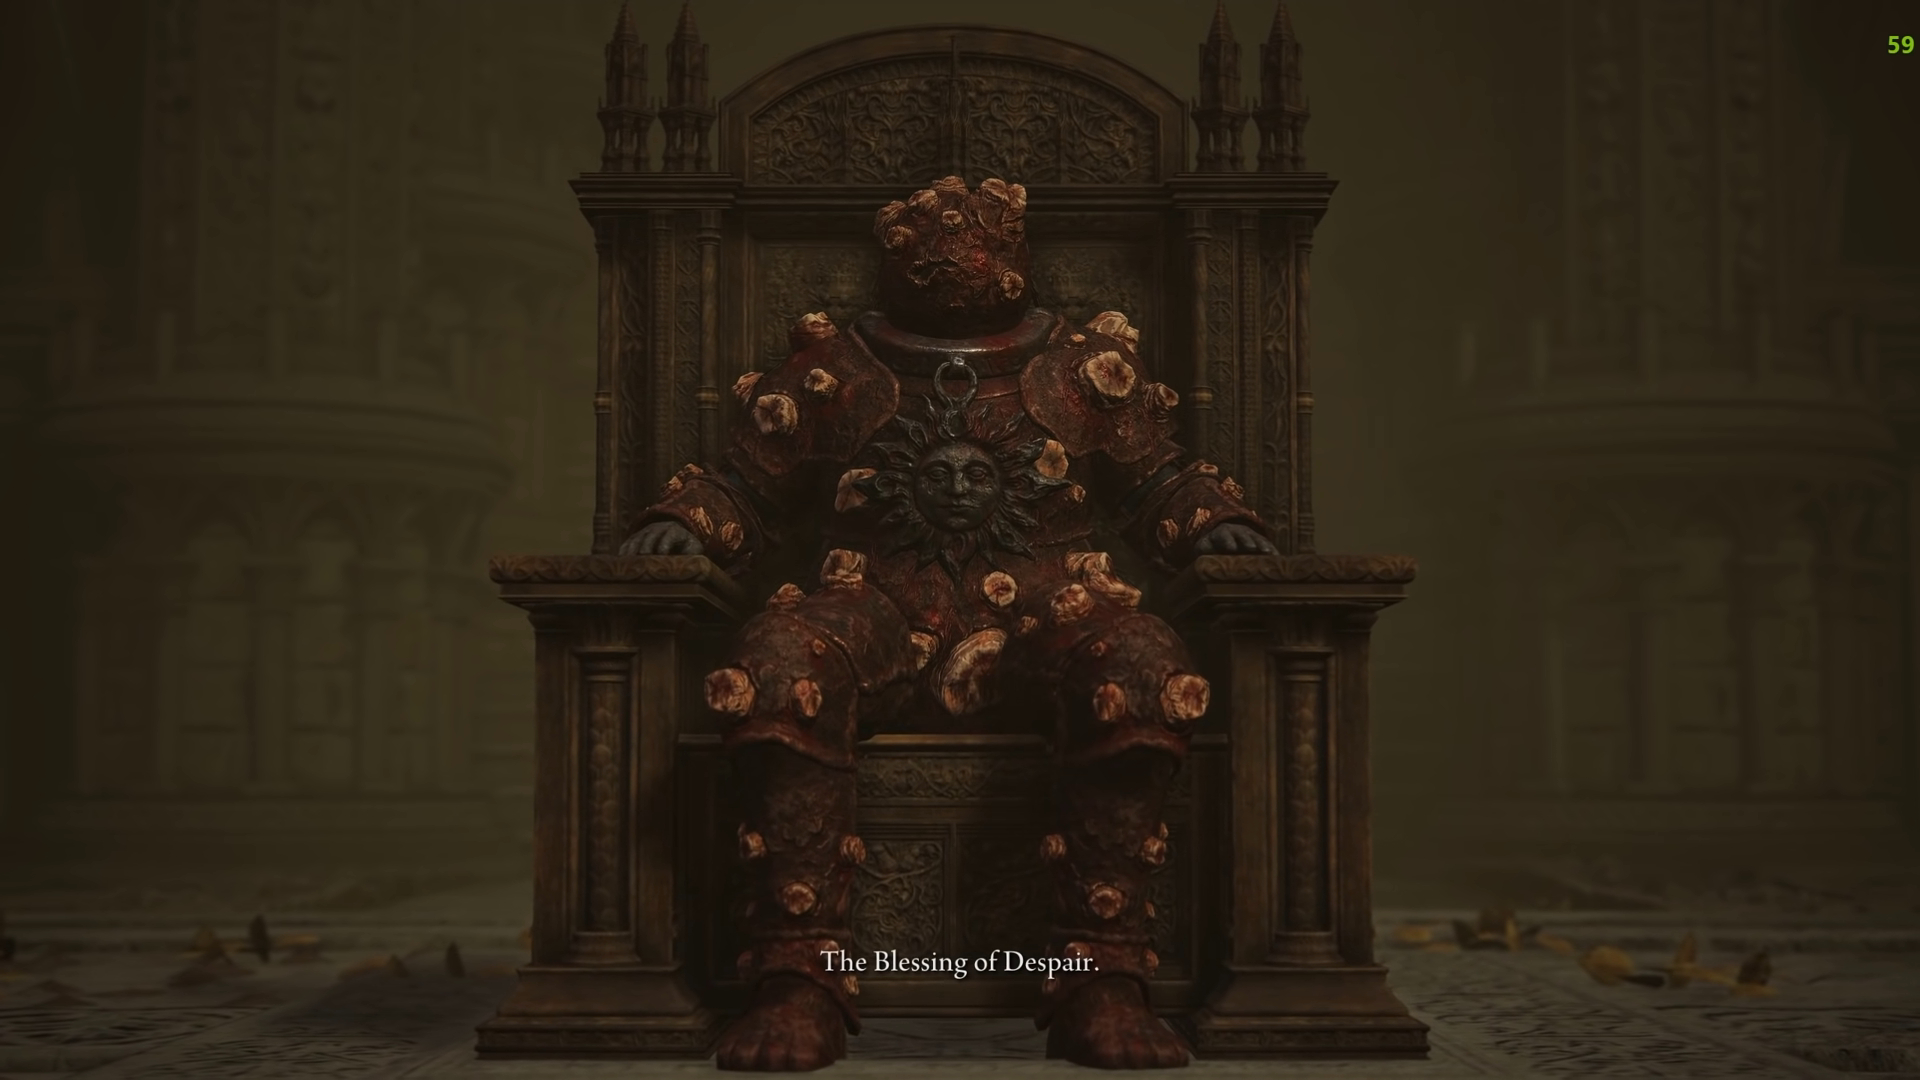 A red rotting man on a throne.